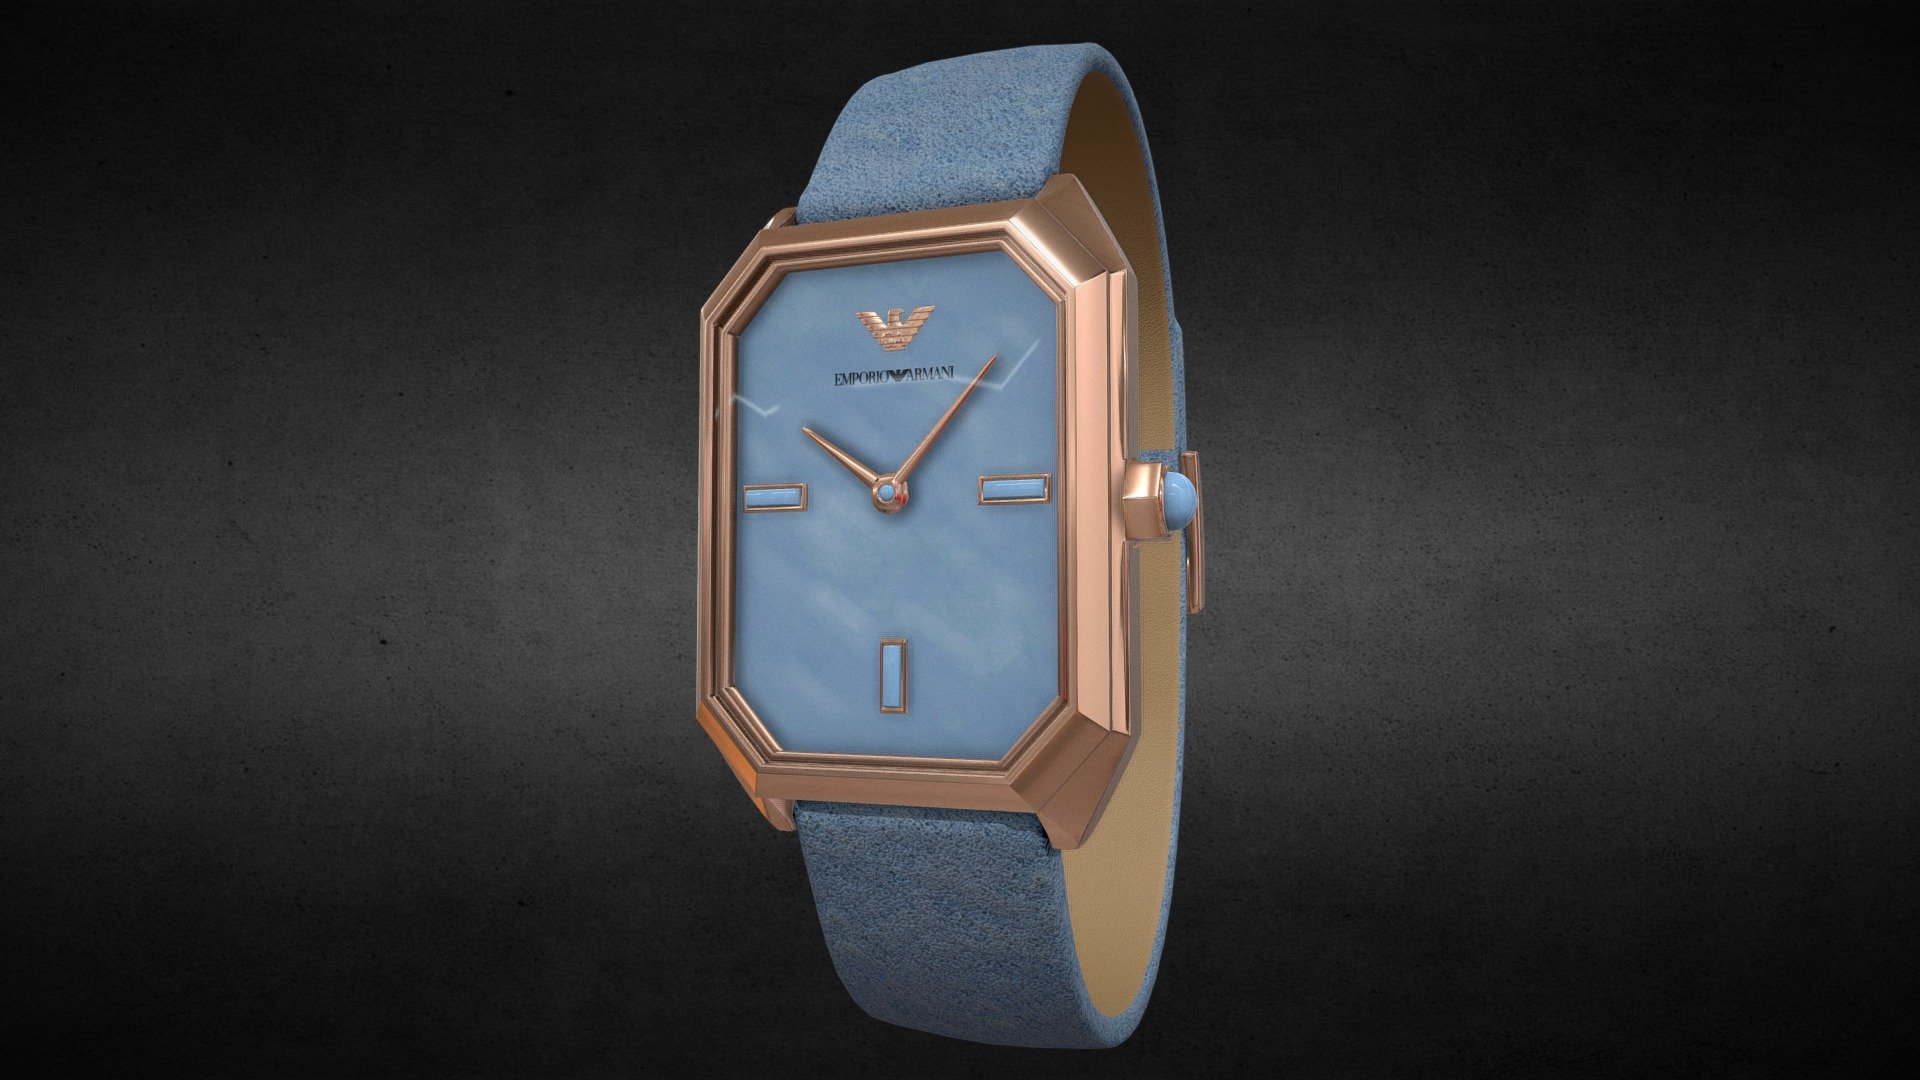 Awesome stainless steel Armani Two-Hand Blue Leather Watch․
Use for Unreal Engine 4 and Unity3D. Try in augmented reality in the AR-Watches app. 
Links to the app: Android, iOS

Currently available for download in FBX format.

3D model developed by AR-Watches

Disclaimer: We do not own the design of the watch, we only made the 3D model 3d model